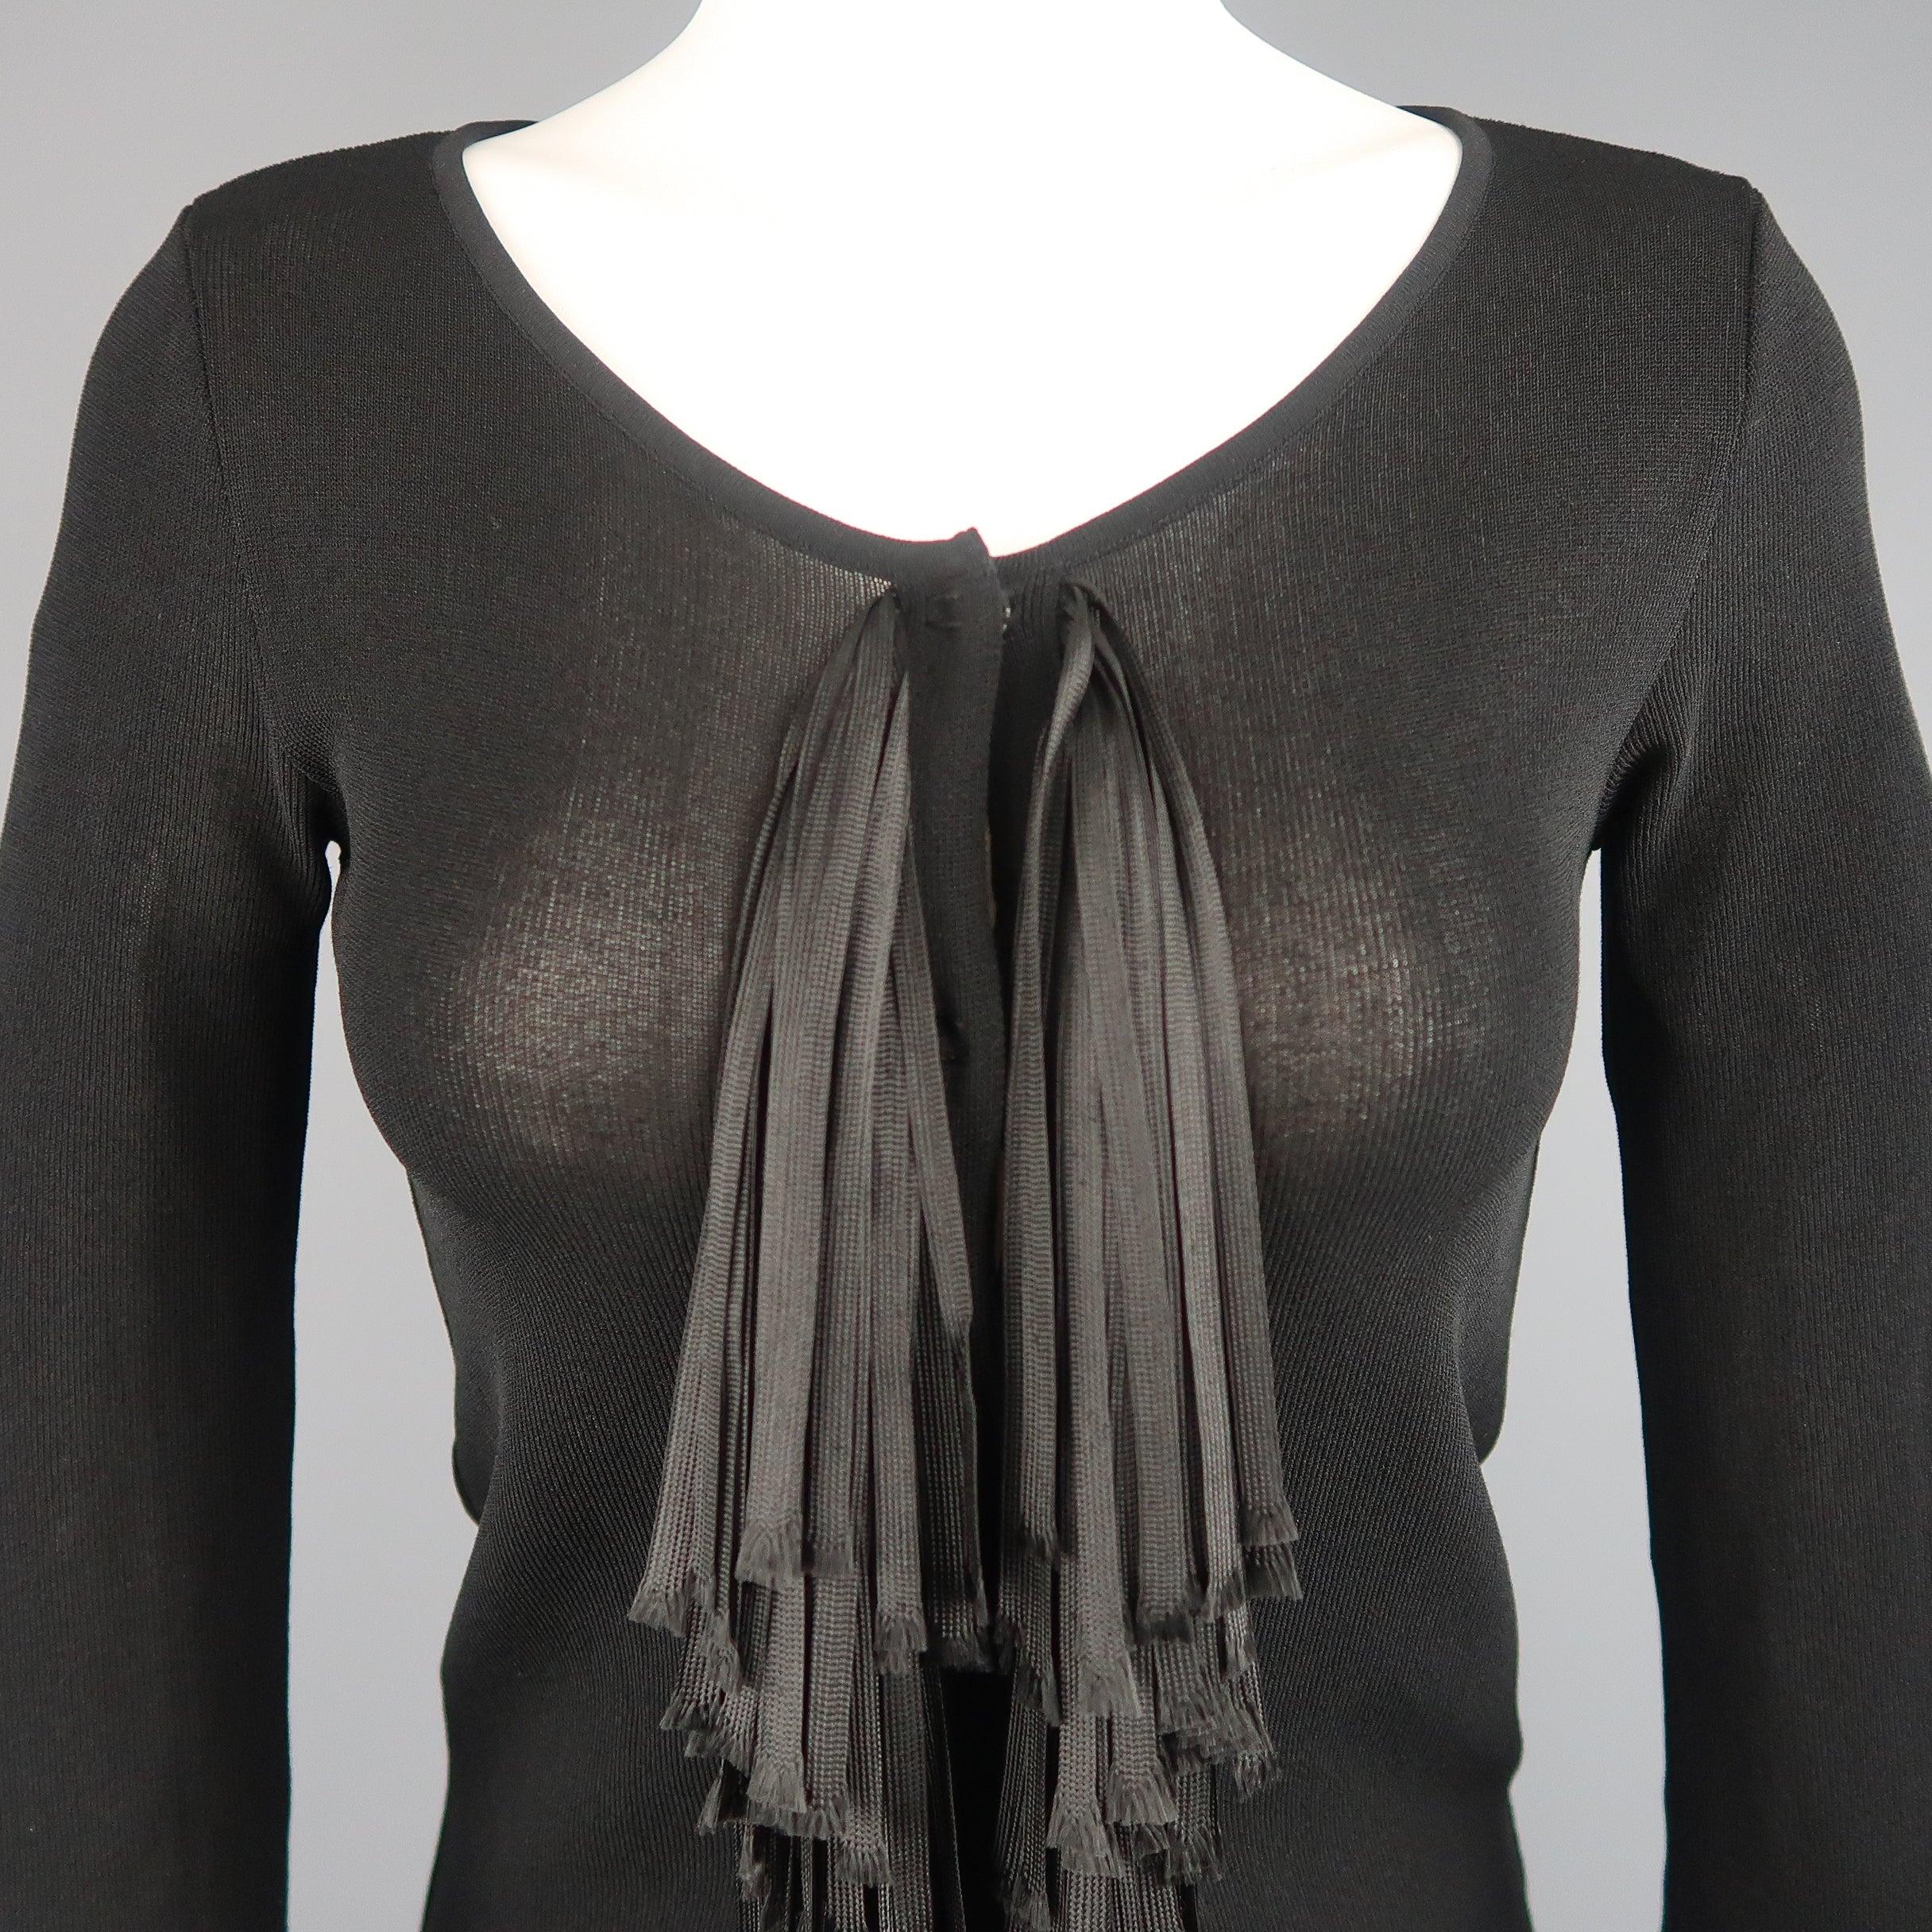 This GIAMBATTISTA VALLI cardigan comes in a sheer black knit and features a round scoop neck, three quarter sleeves, hidden placket snap closure front, and layered raw edge ribbon fringe down the front. Made In Italy.
Excellent Pre-Owned Condition.
